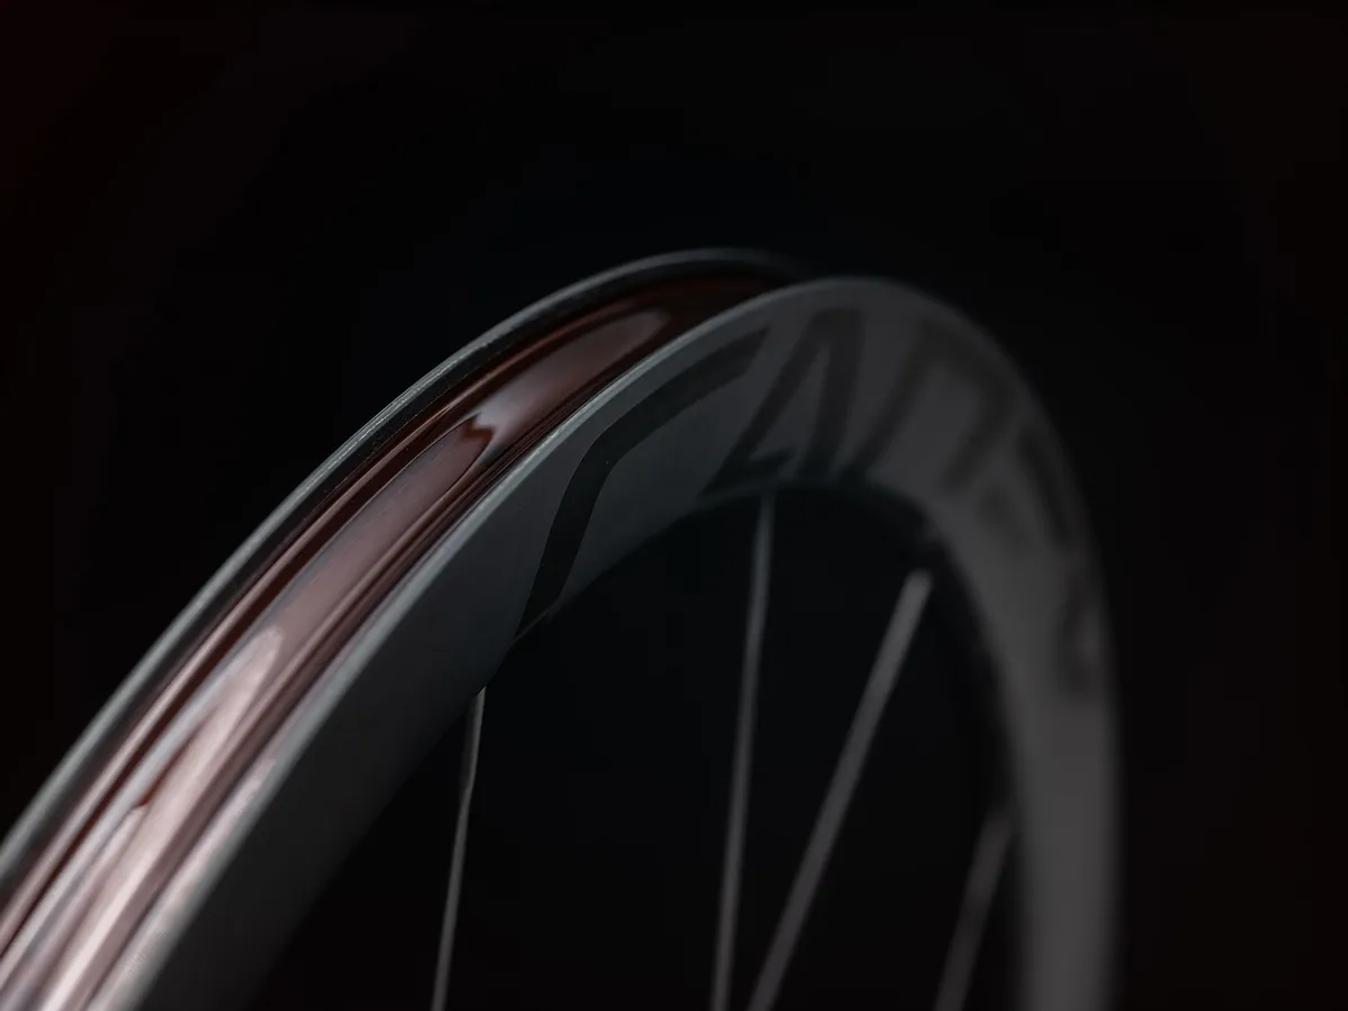 The wheels feature a 22.4mm inner rim width